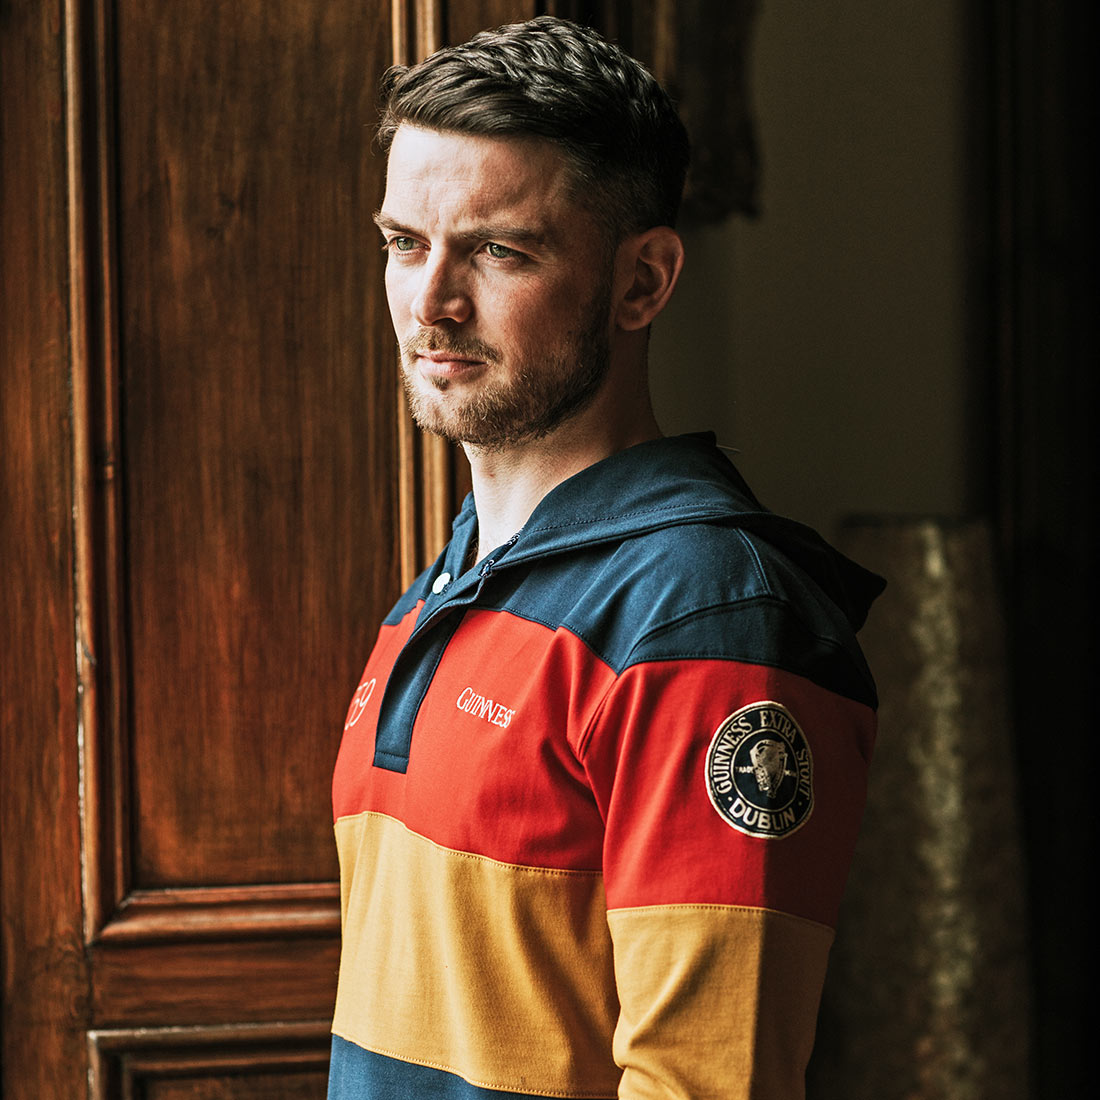 Hooded Rugby Jersey